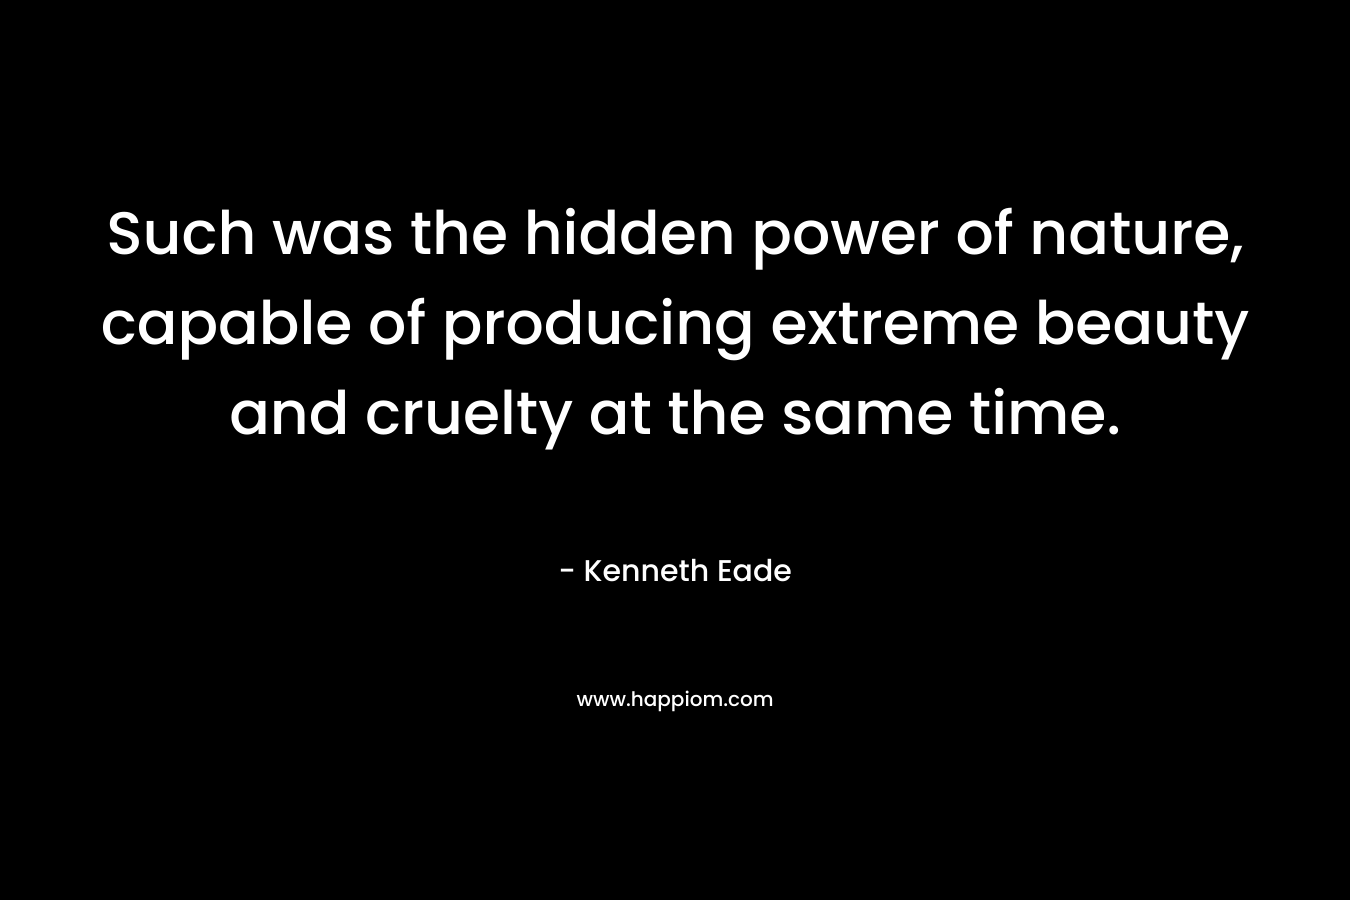 Such was the hidden power of nature, capable of producing extreme beauty and cruelty at the same time. – Kenneth Eade